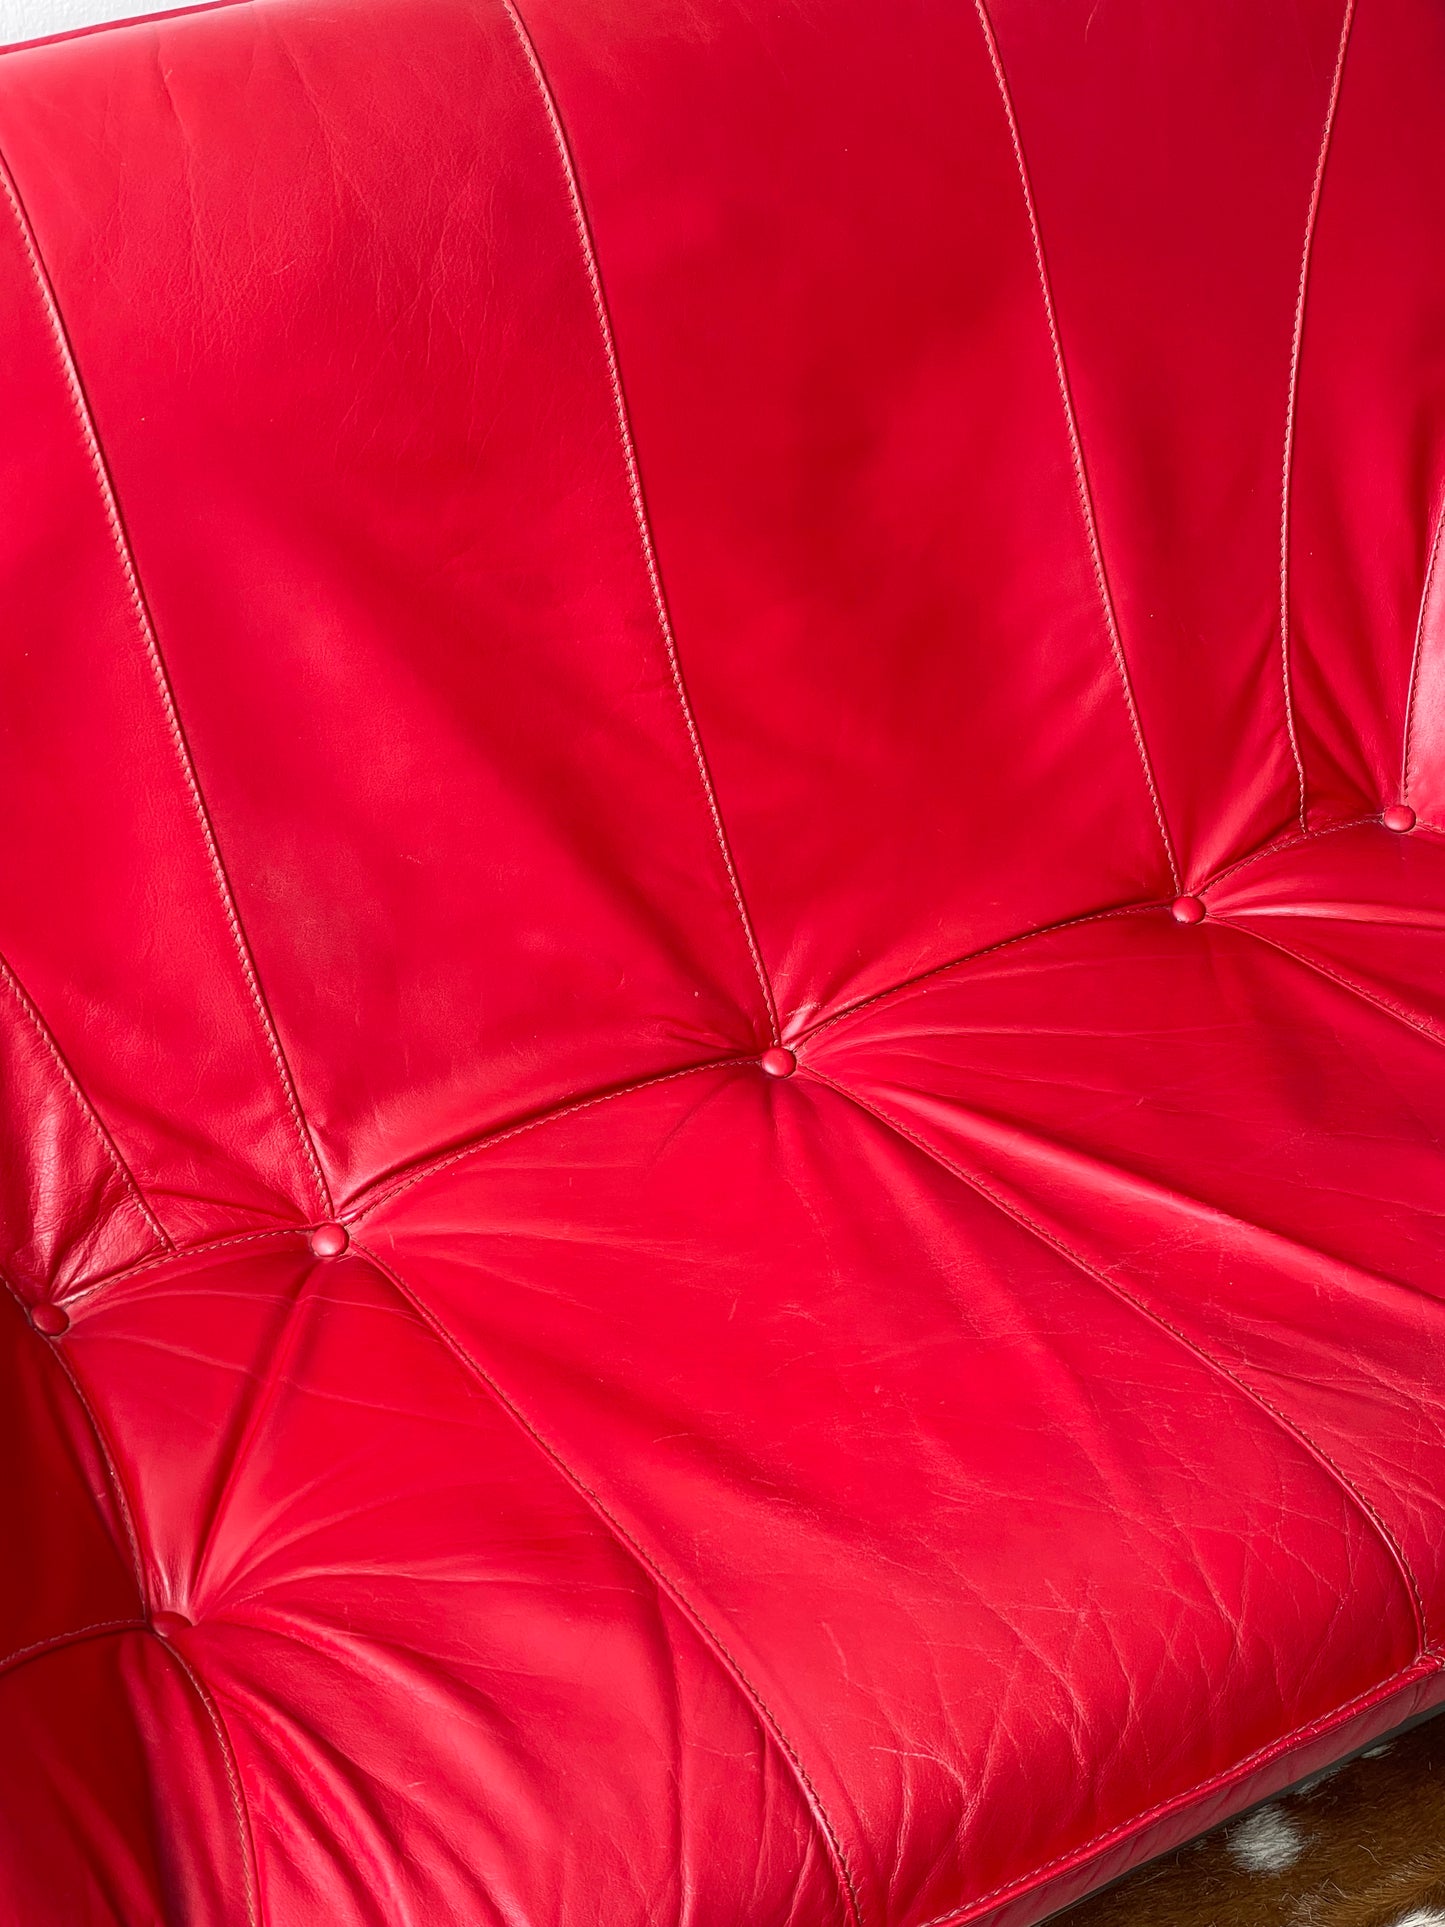 Red Leather Sofa by Module